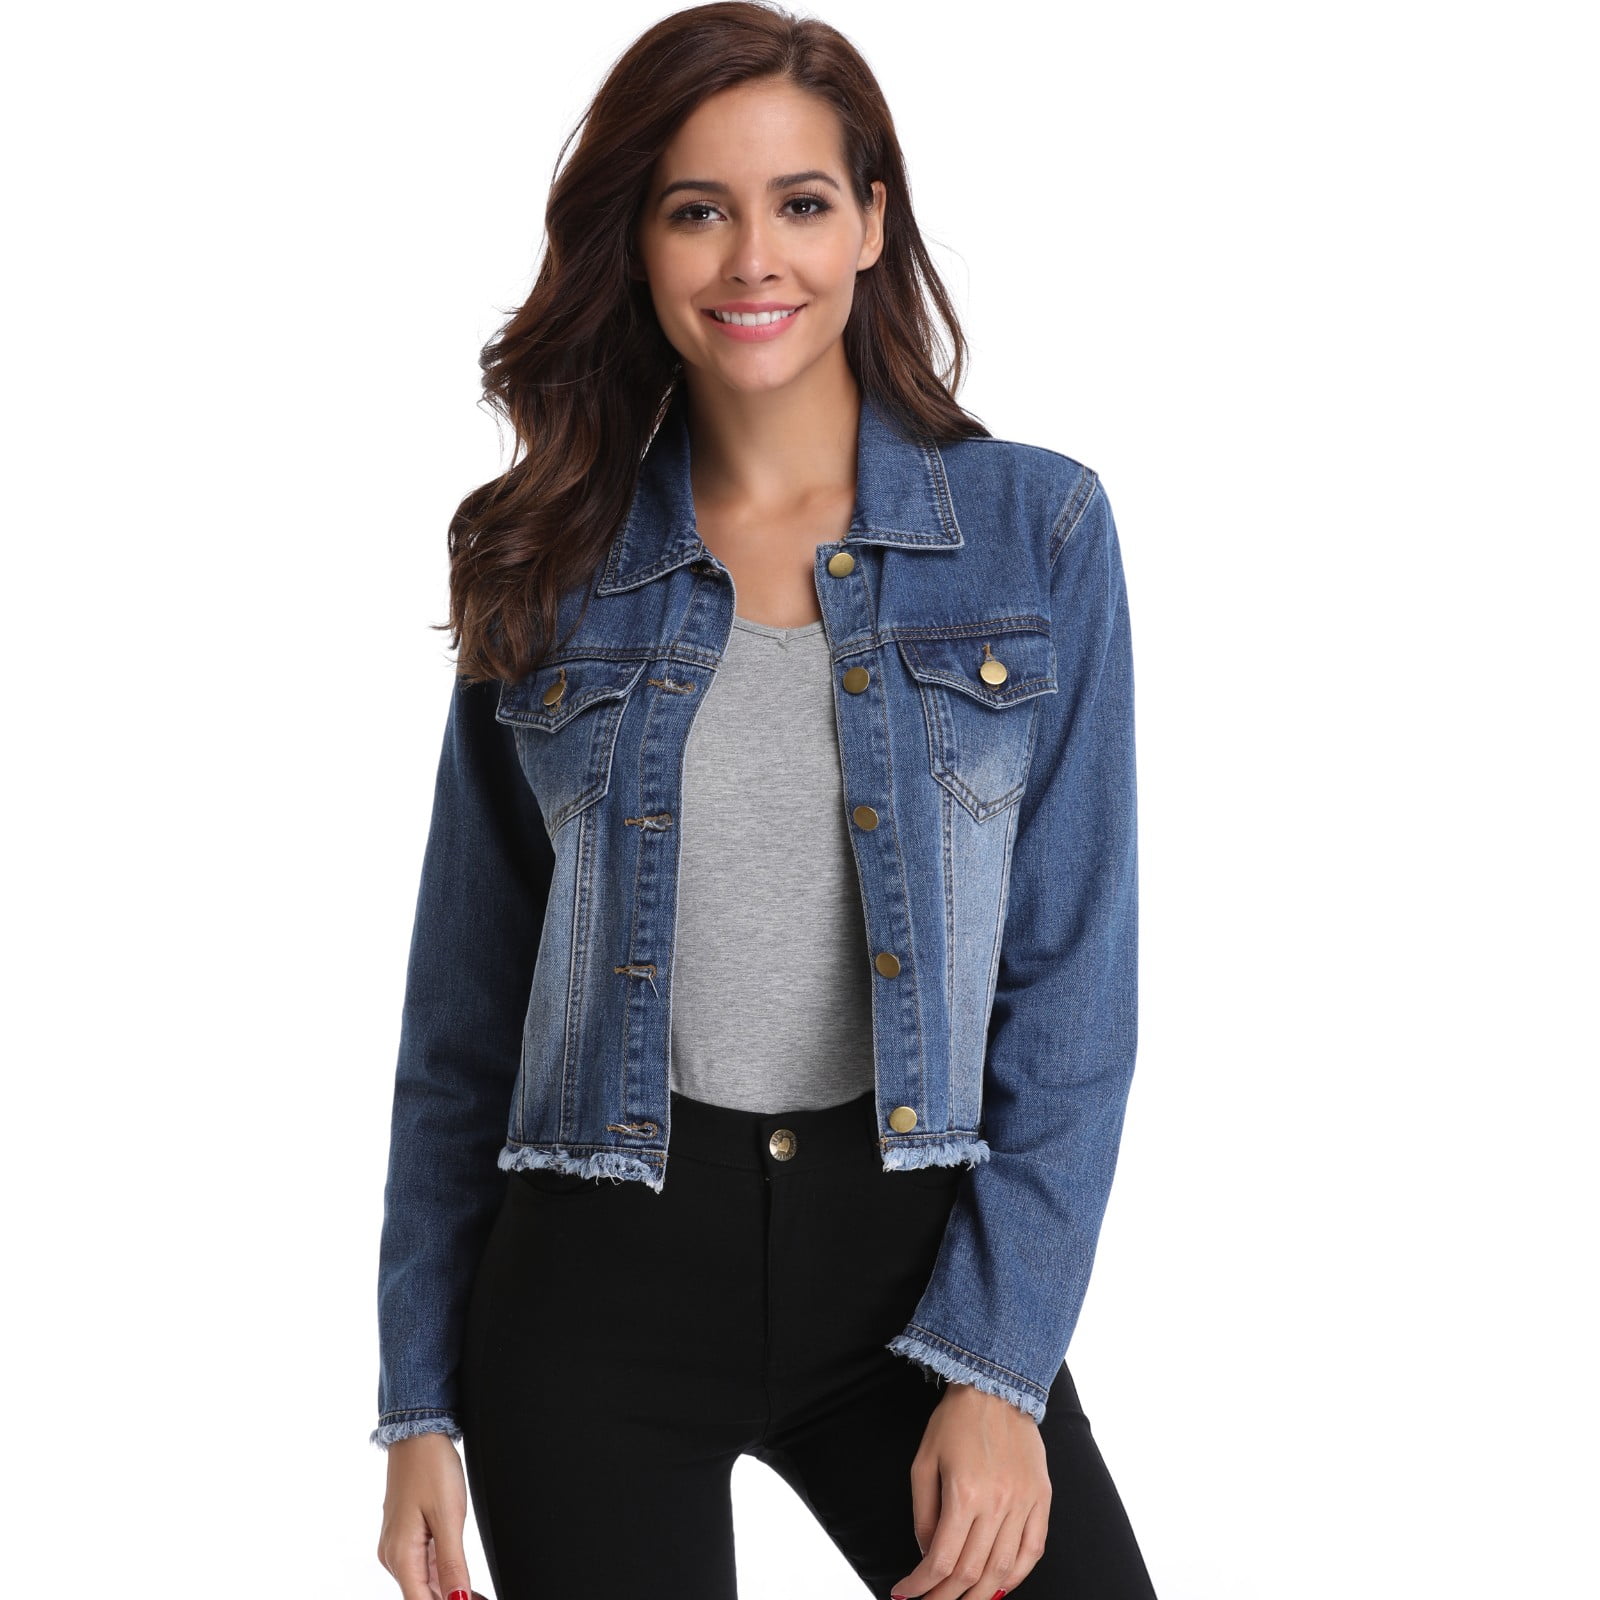 Miss Moly Womens Frayed Denim Washed Crop Jean Jacket w 2 Chest Flap Pockets